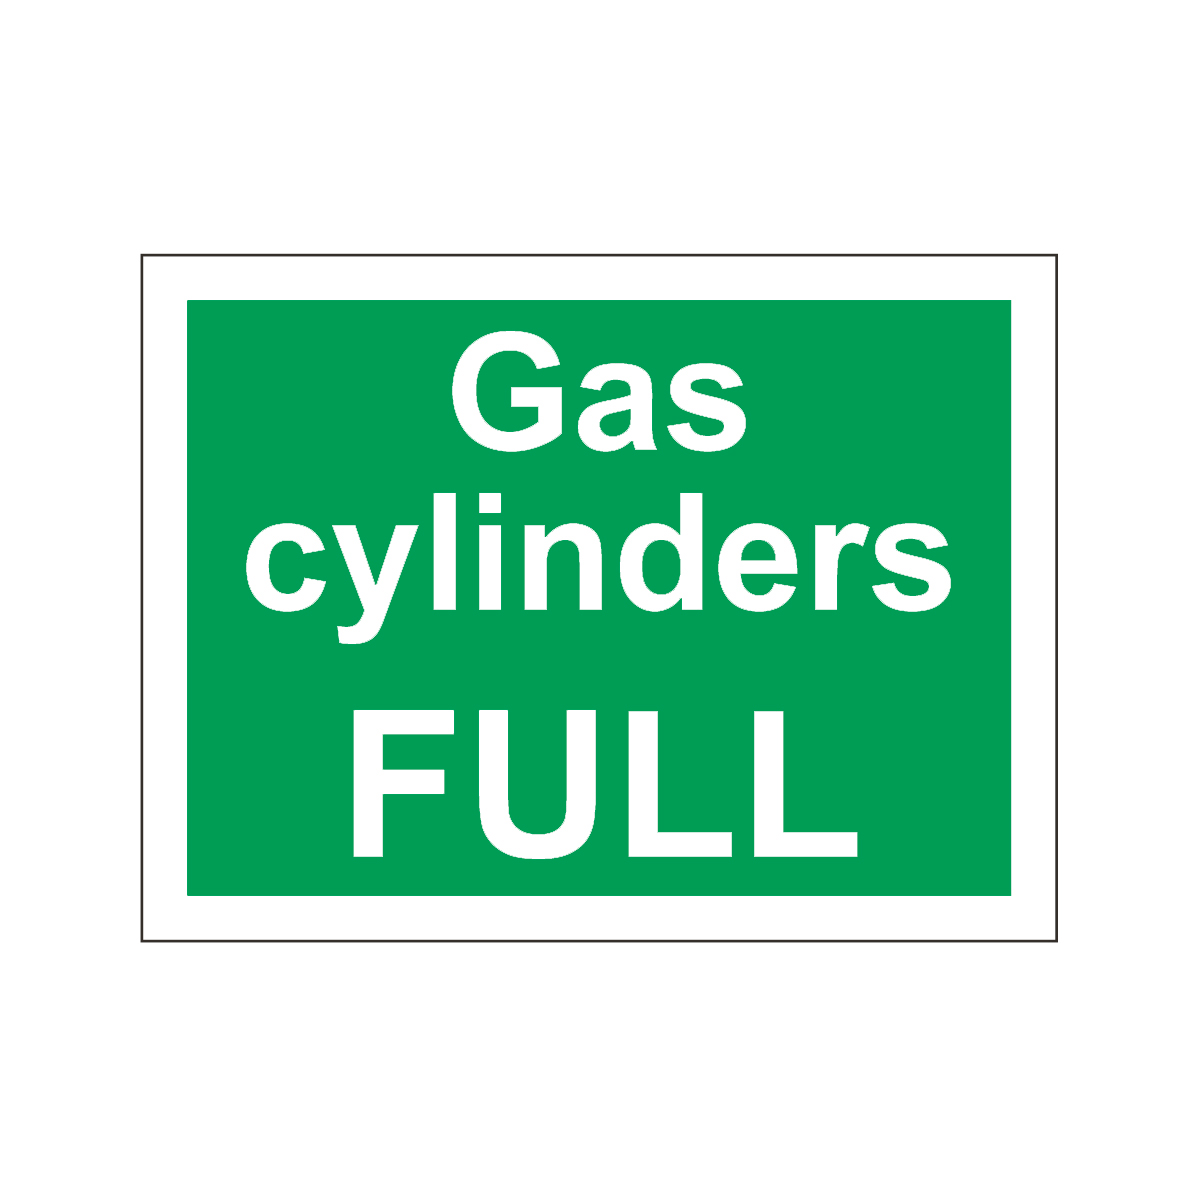 Gas Cylinders Full Safety Sign - Safe Condition Sign from BiGDUG UK